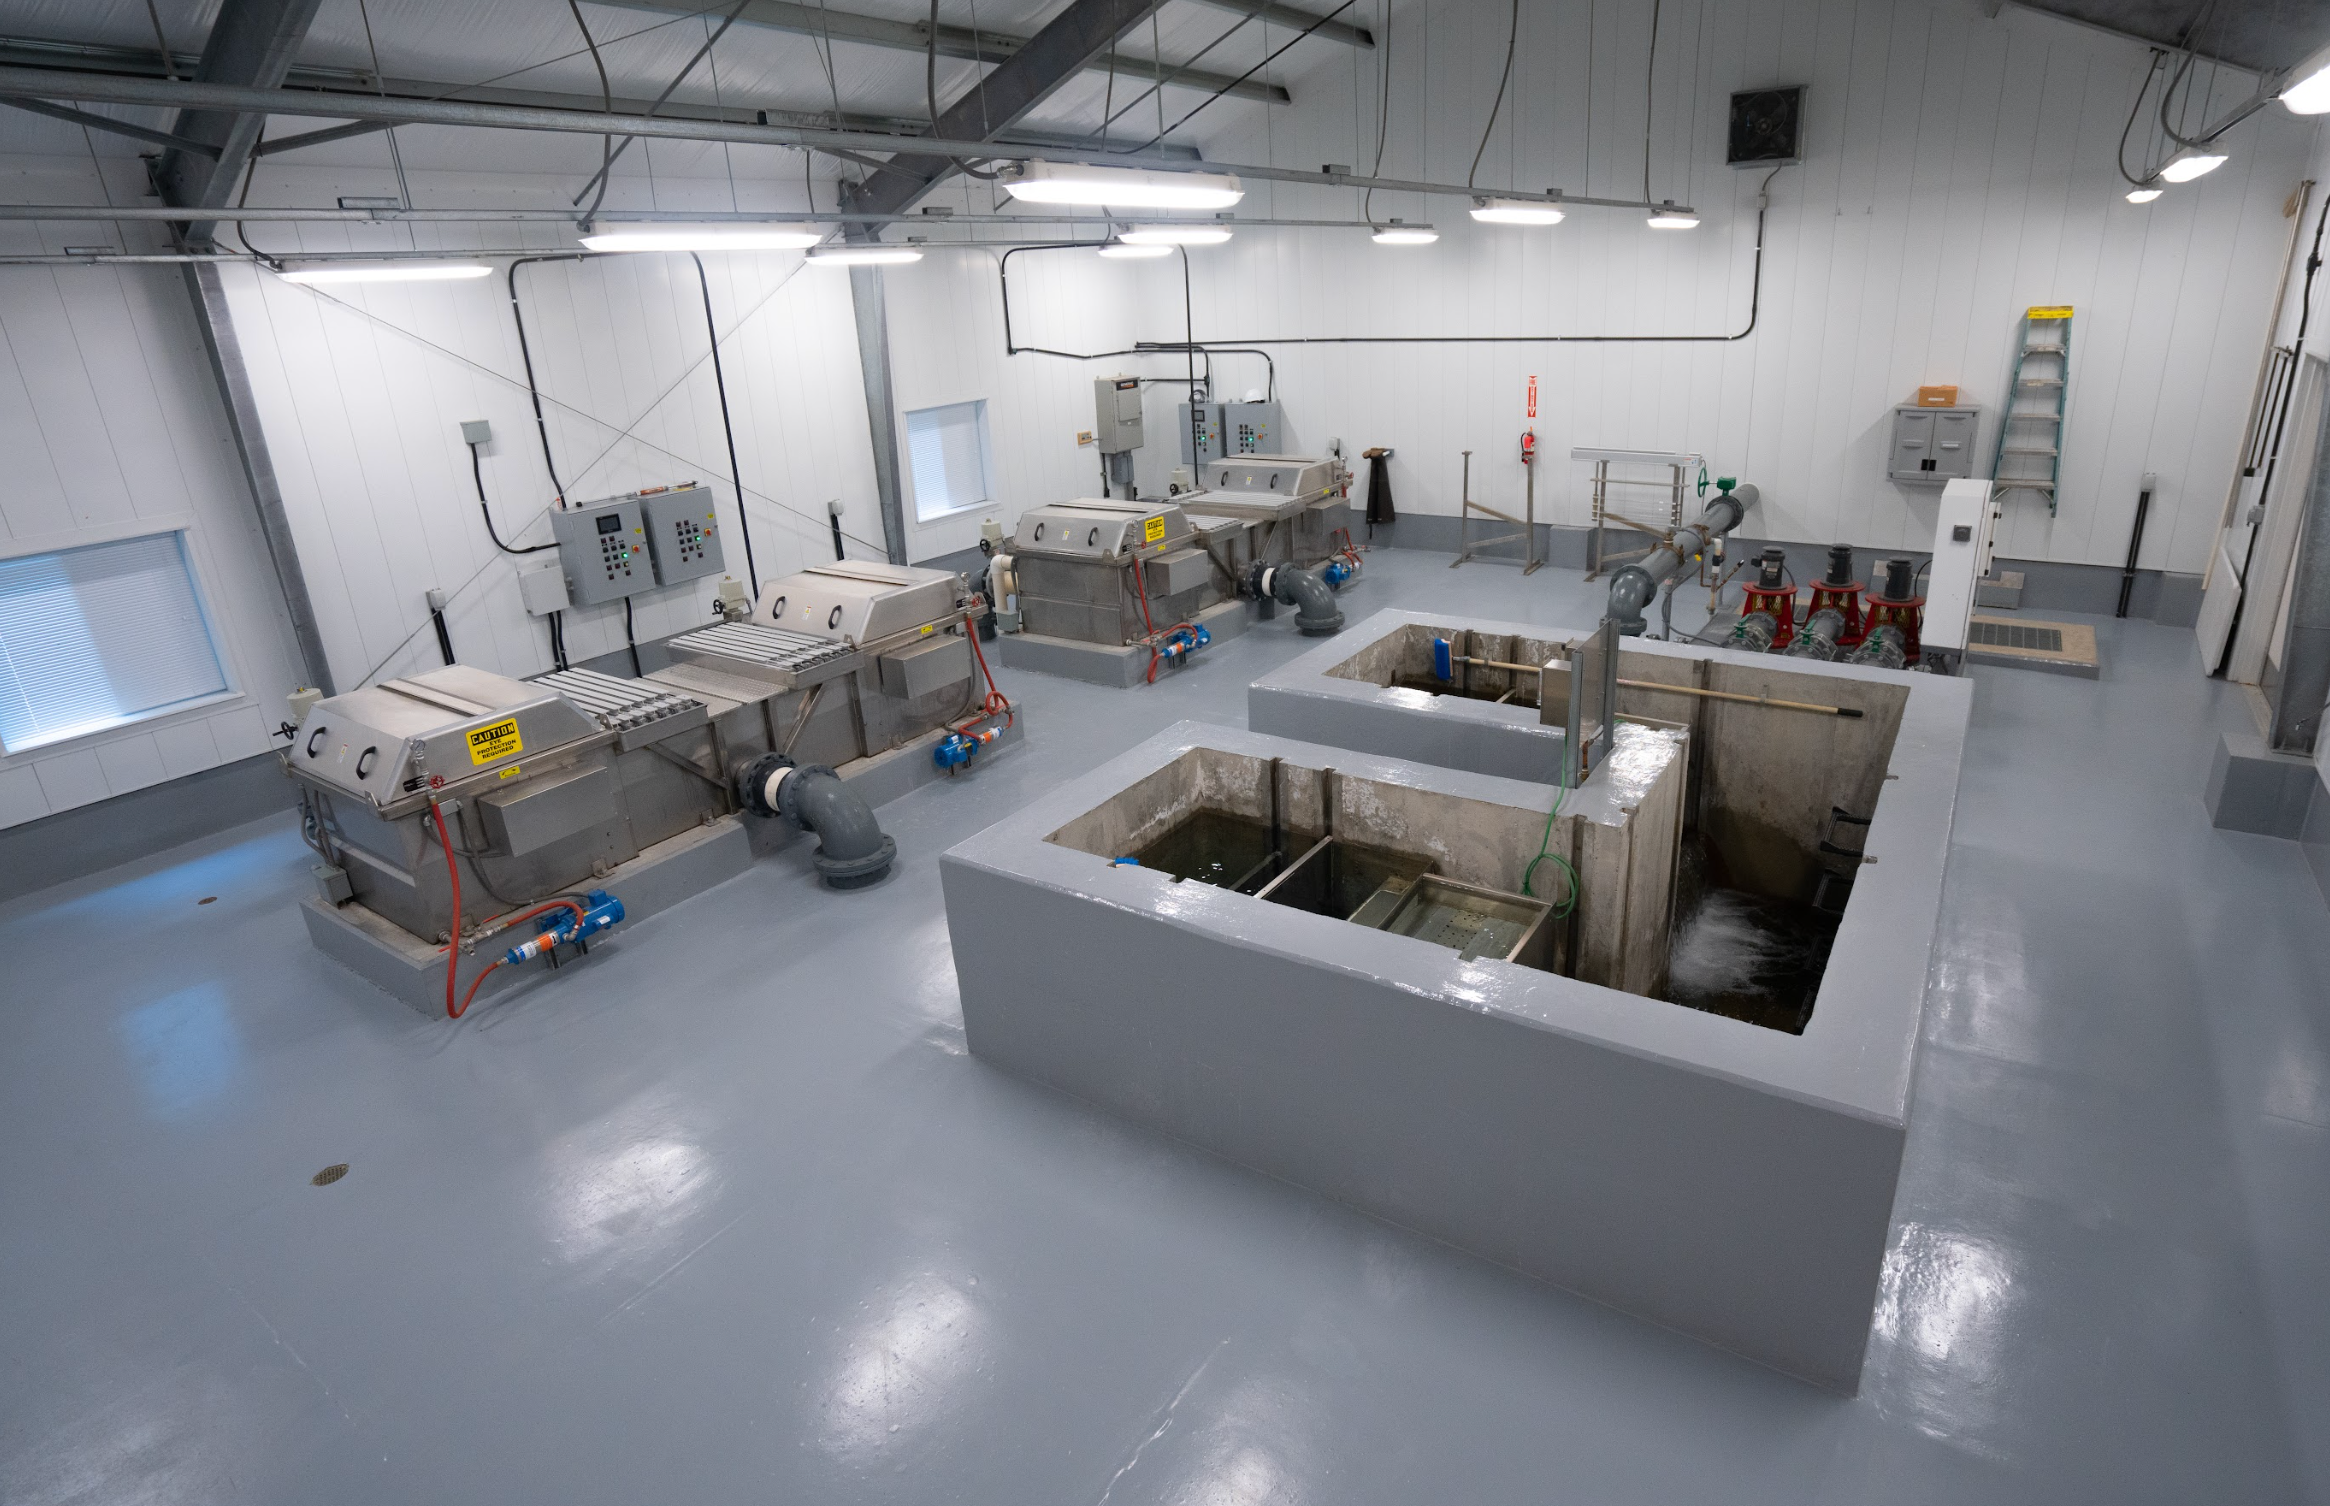 An inside look at the Ten Sleep Fish Hatchery water treatment building with uv water filtration units.